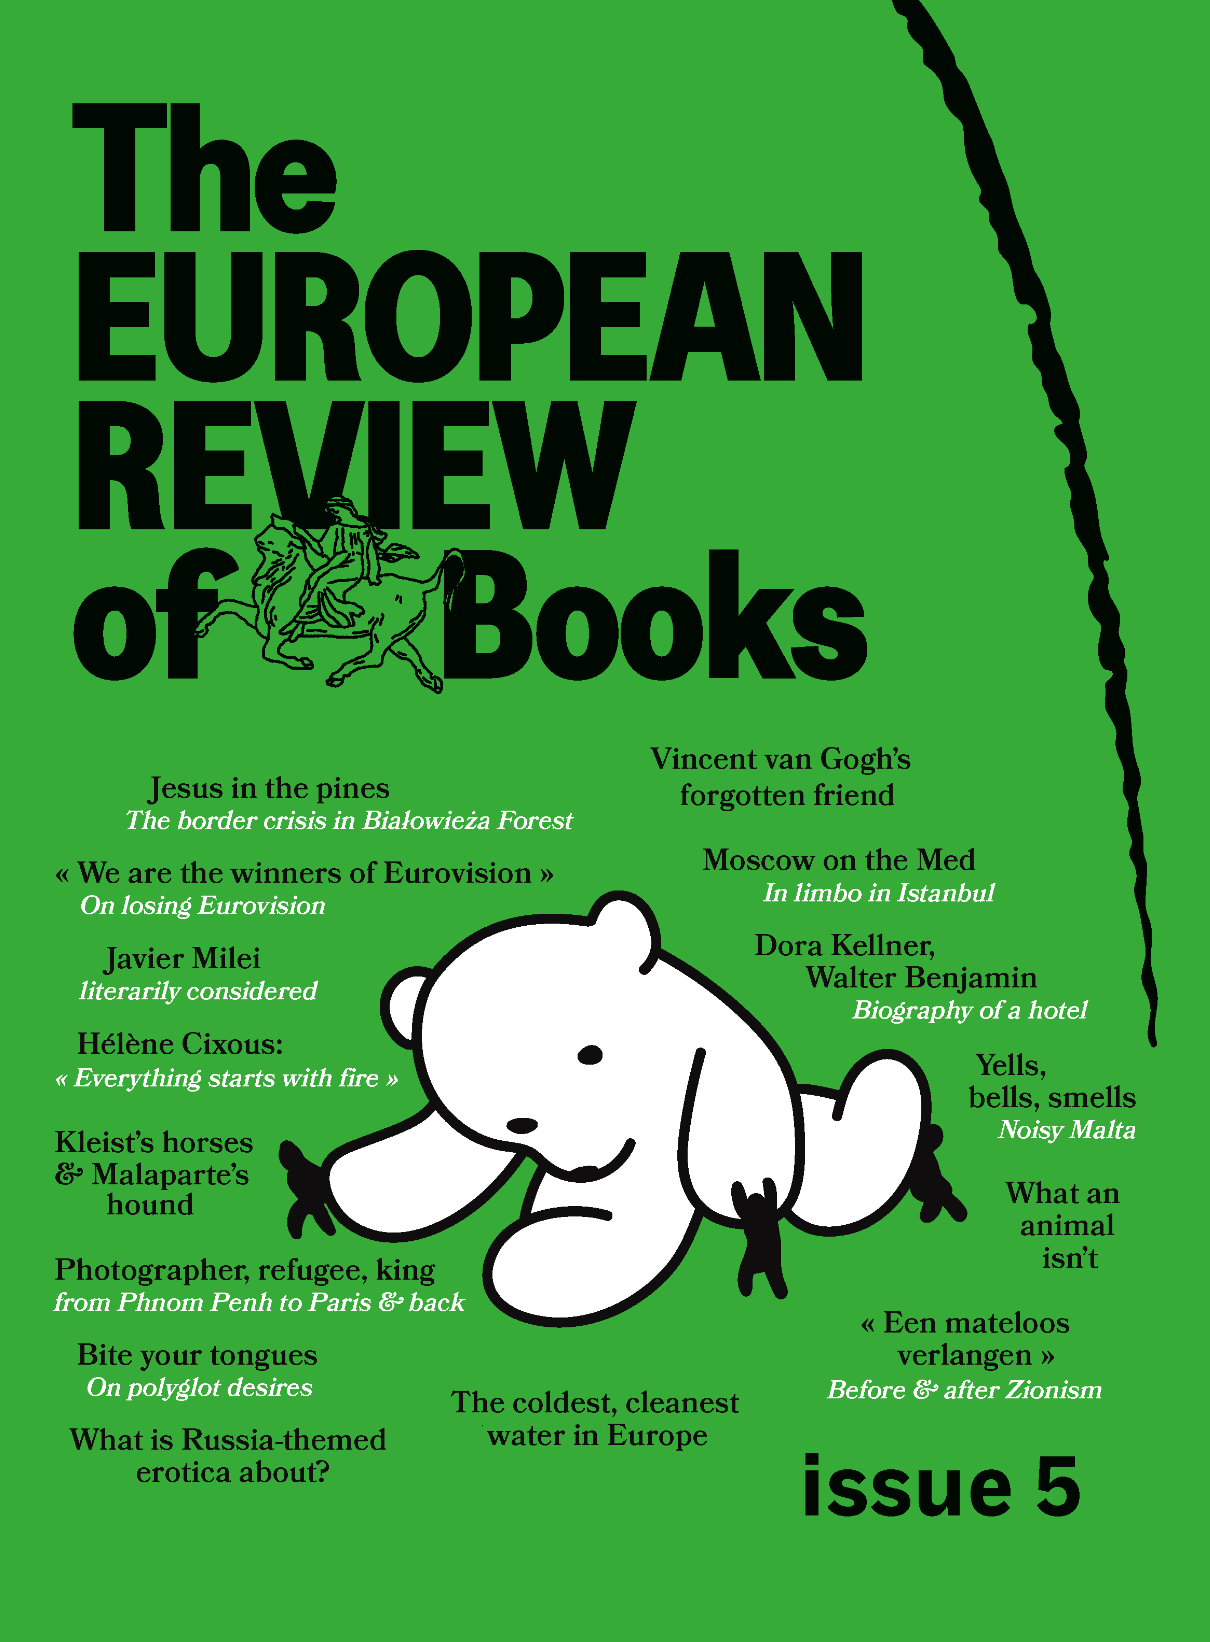 The European Review of Books #05